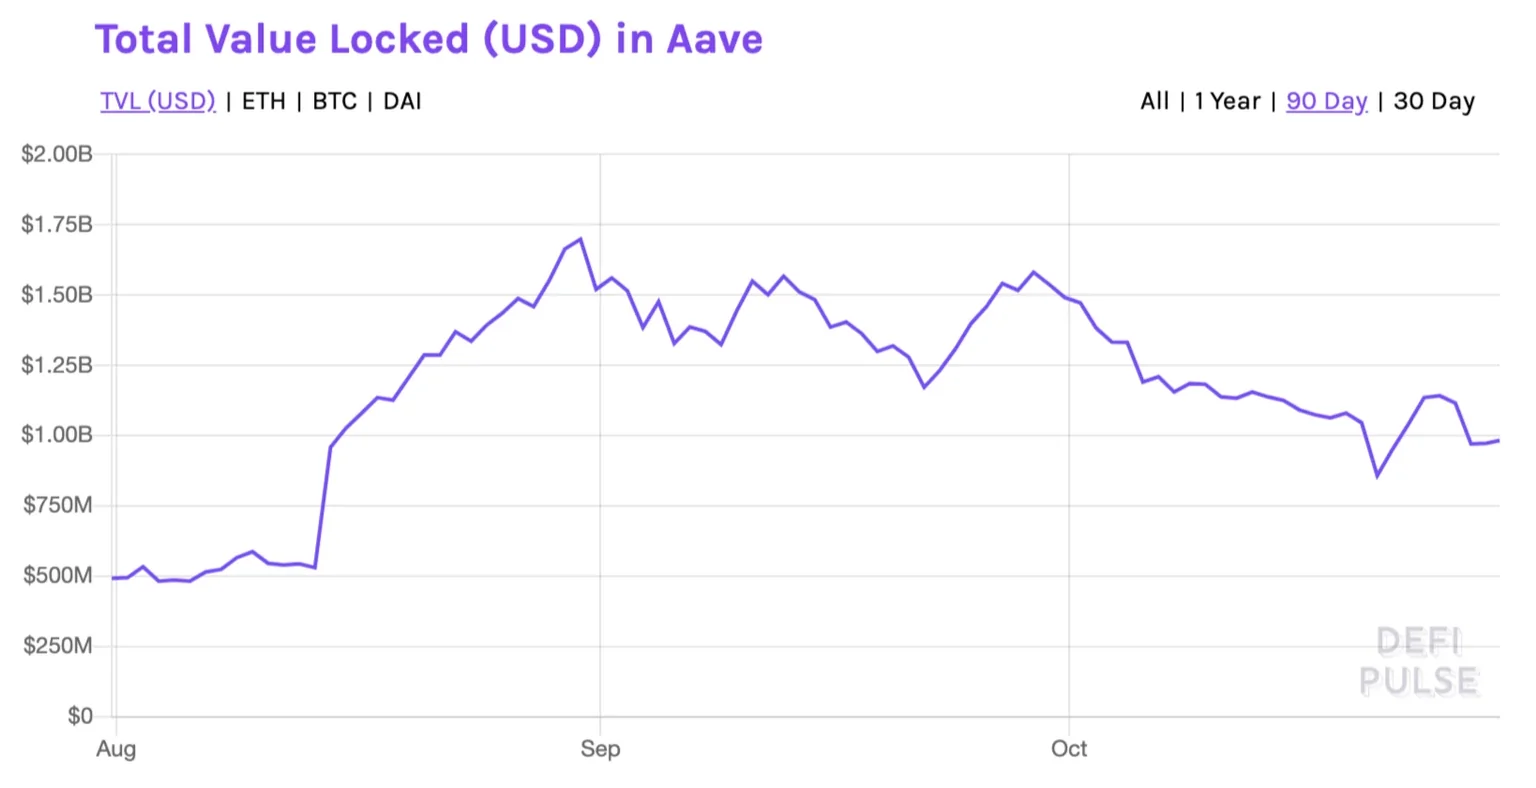 TVL in Aave over the last 90 days from August through October